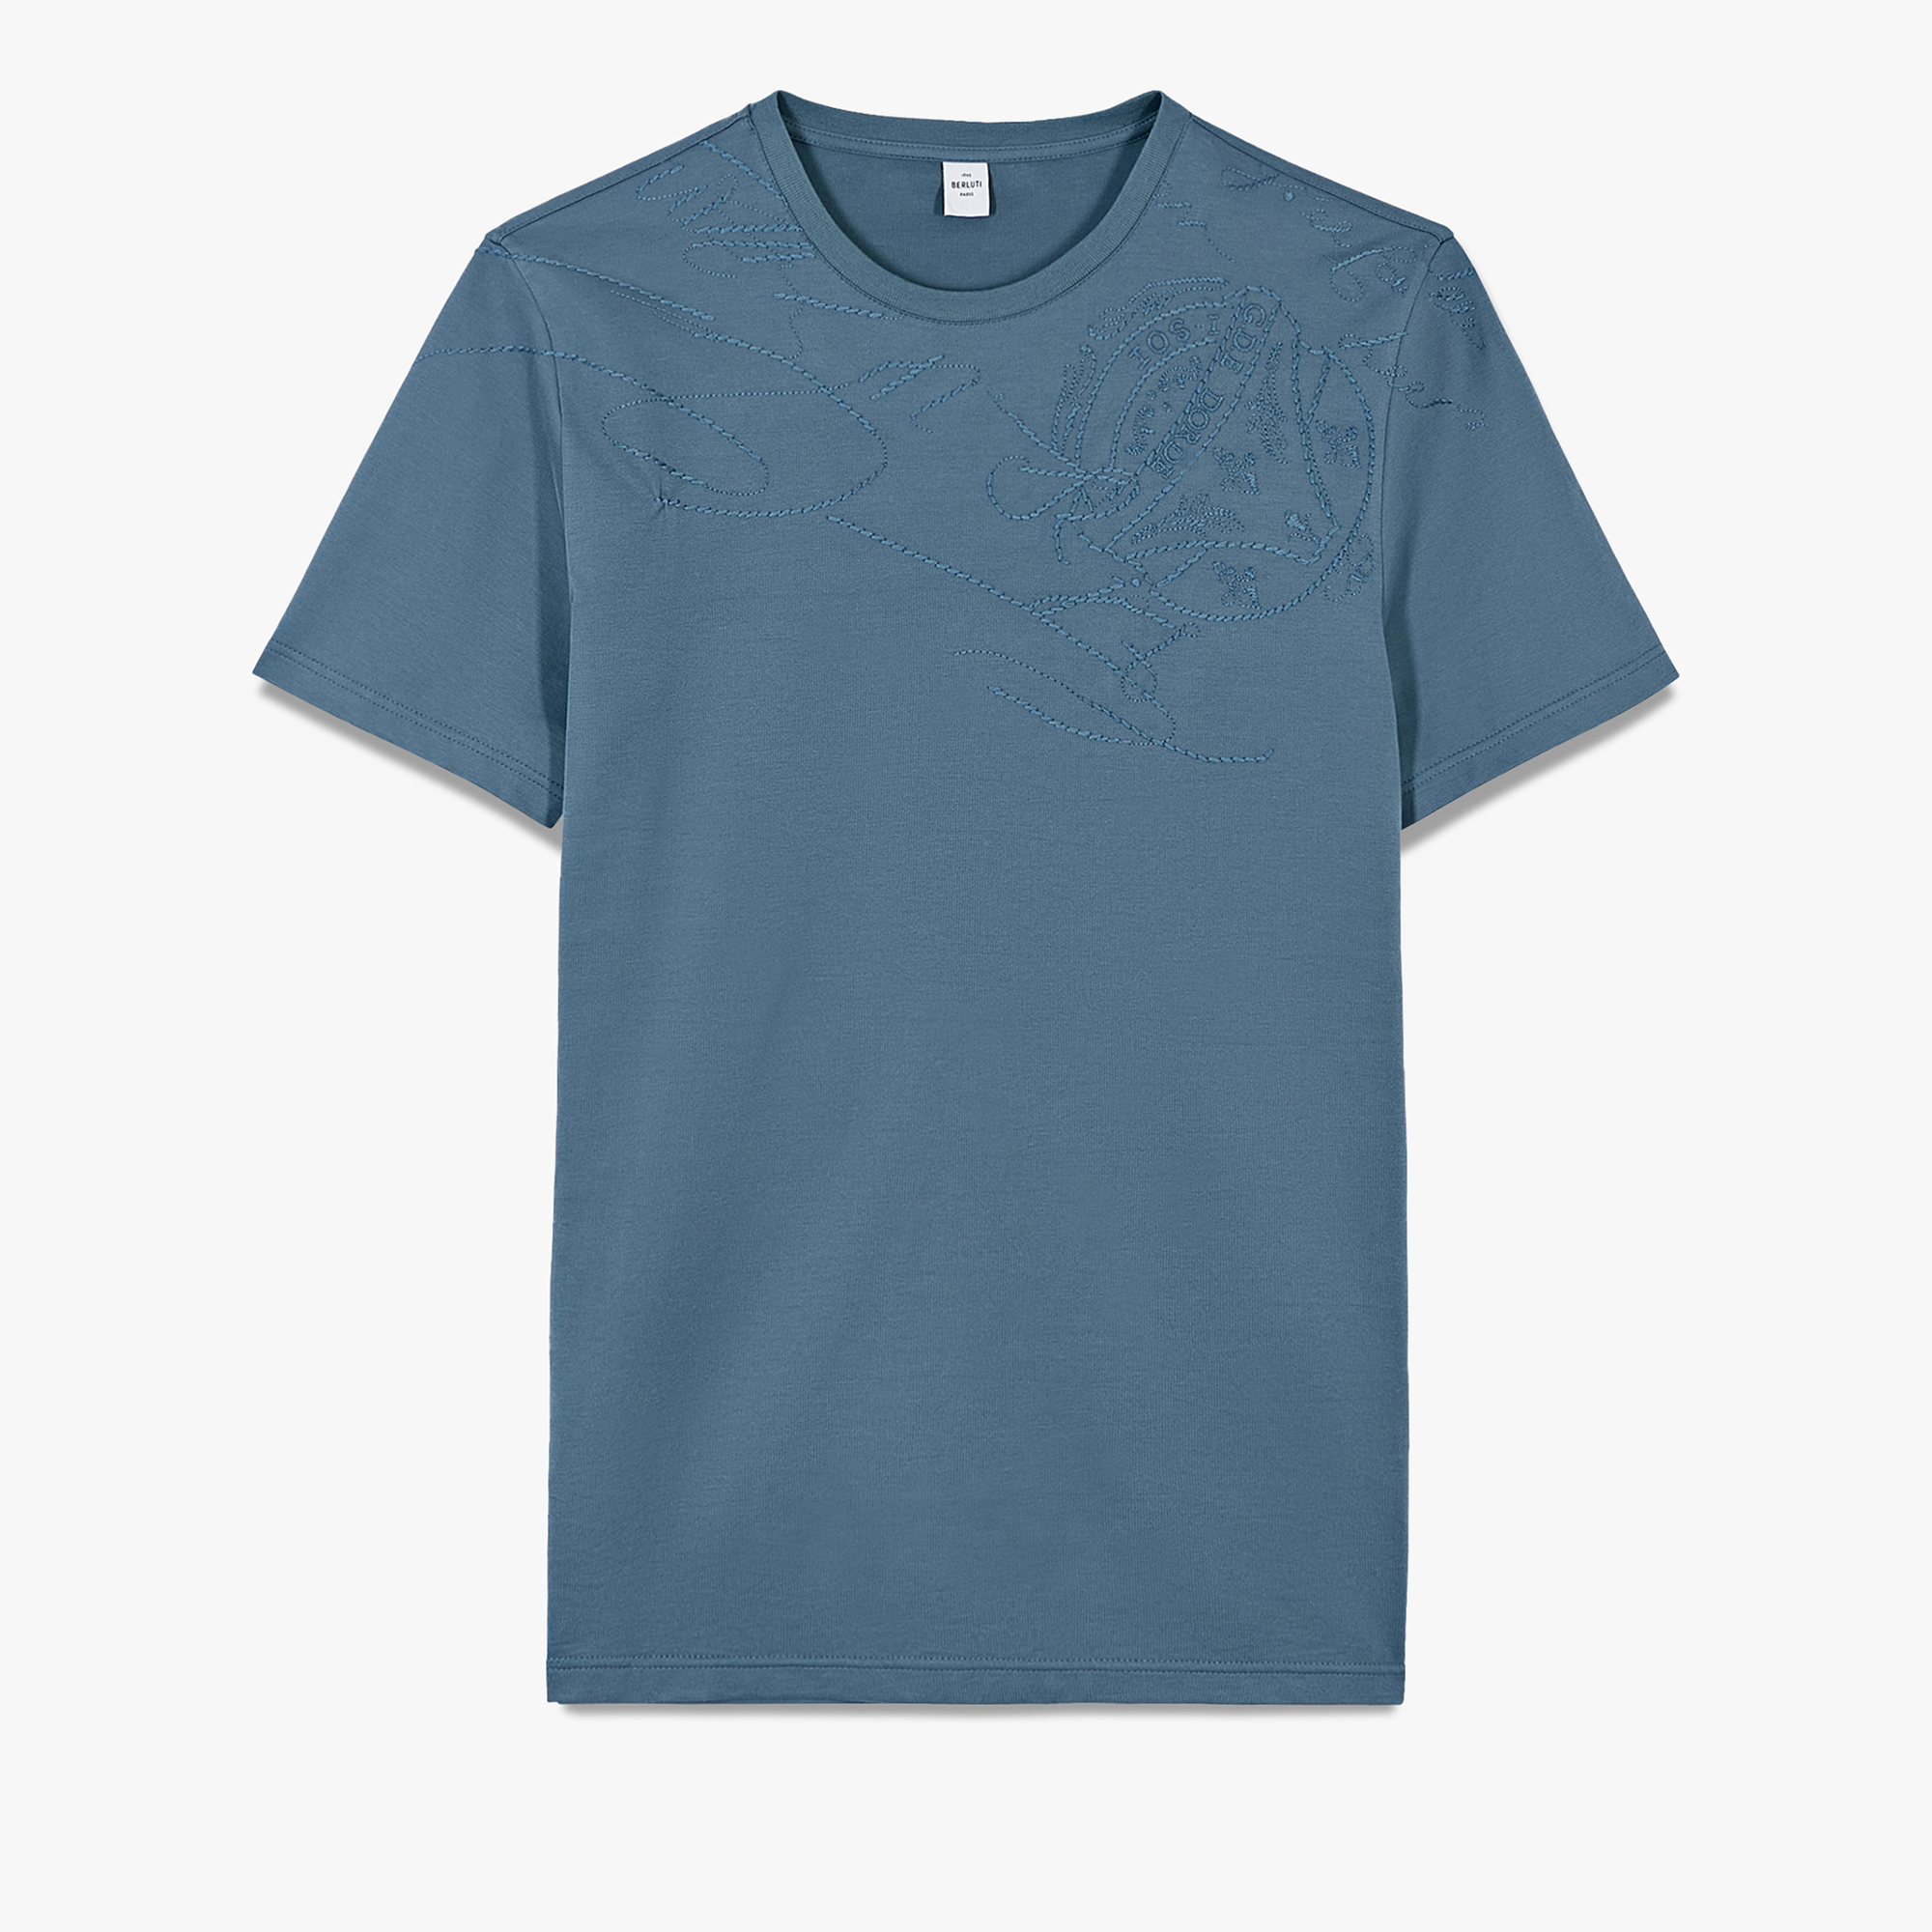 Embroidered Scritto T-Shirt, GREYISH BLUE, hi-res